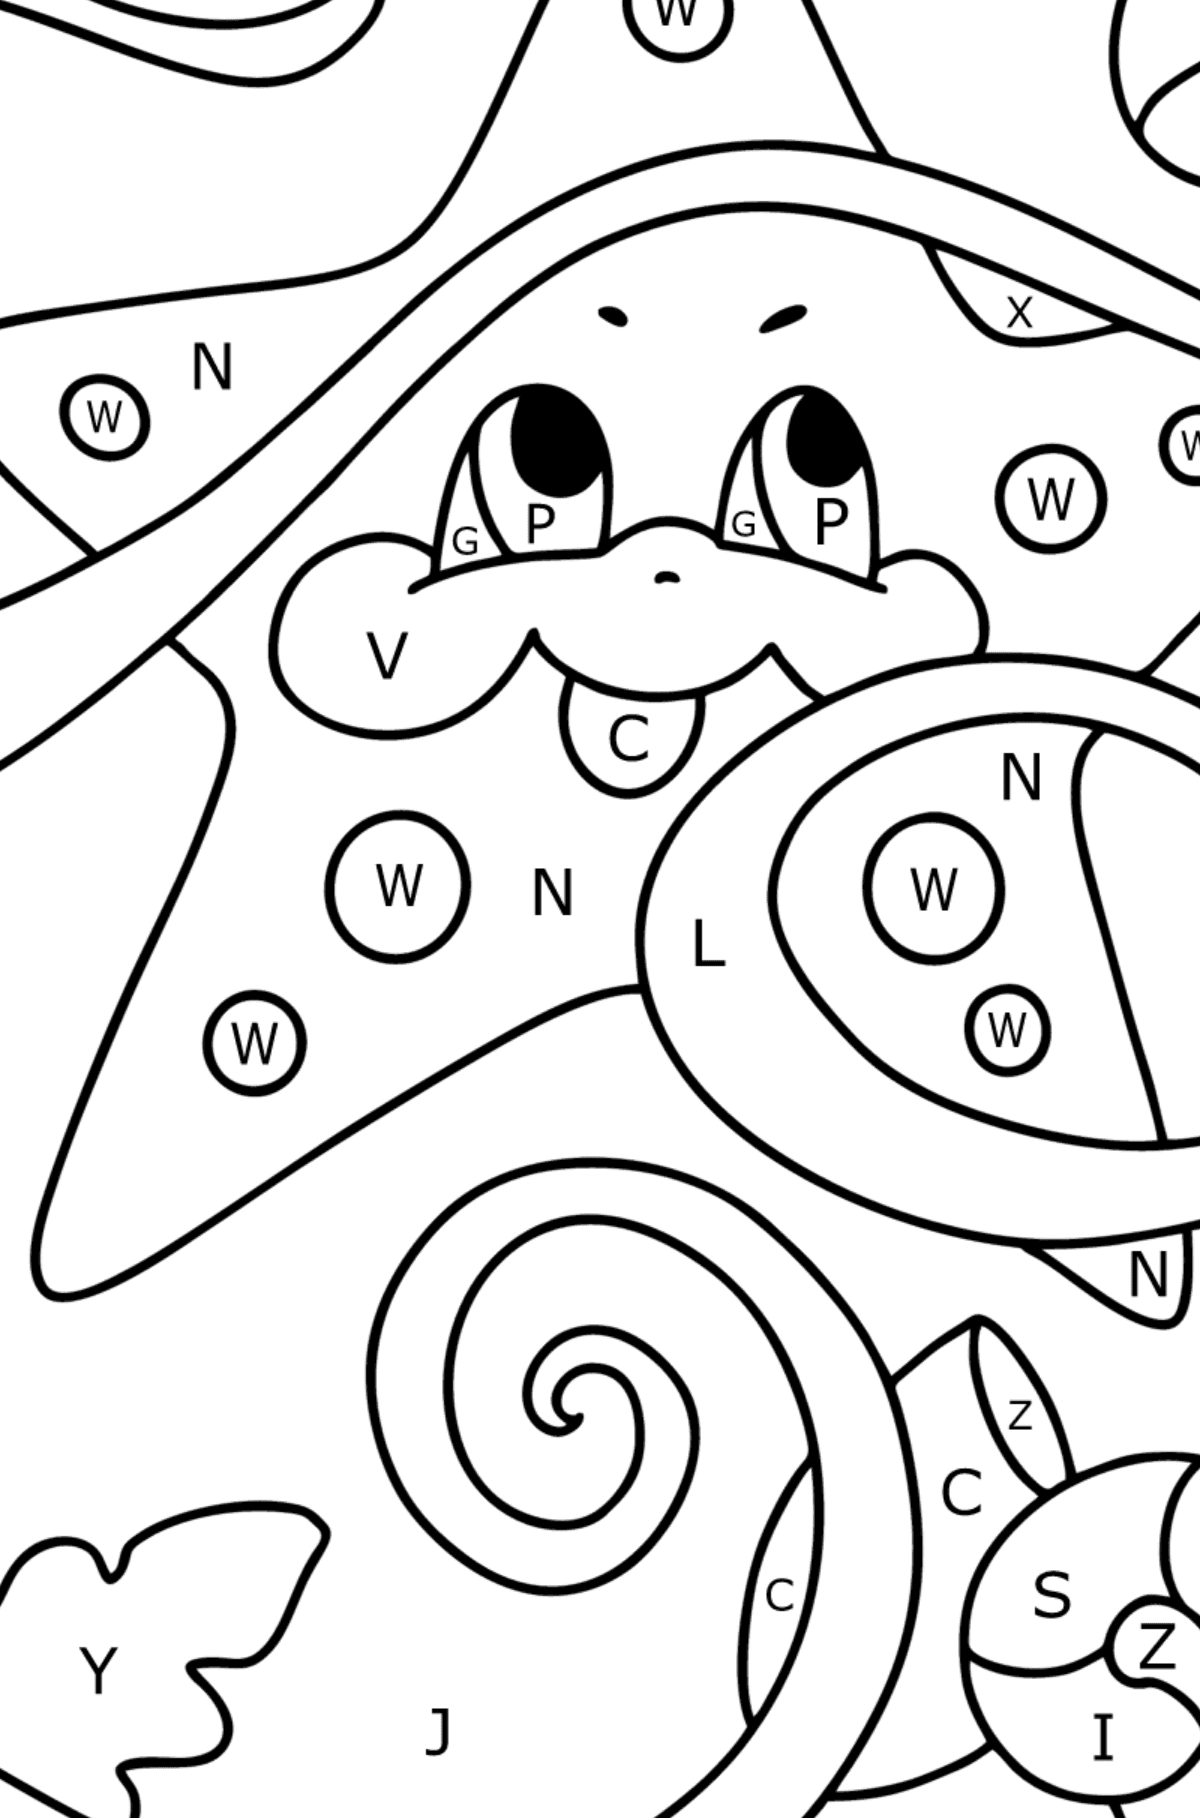 Baby starfish coloring page - Coloring by Letters for Kids